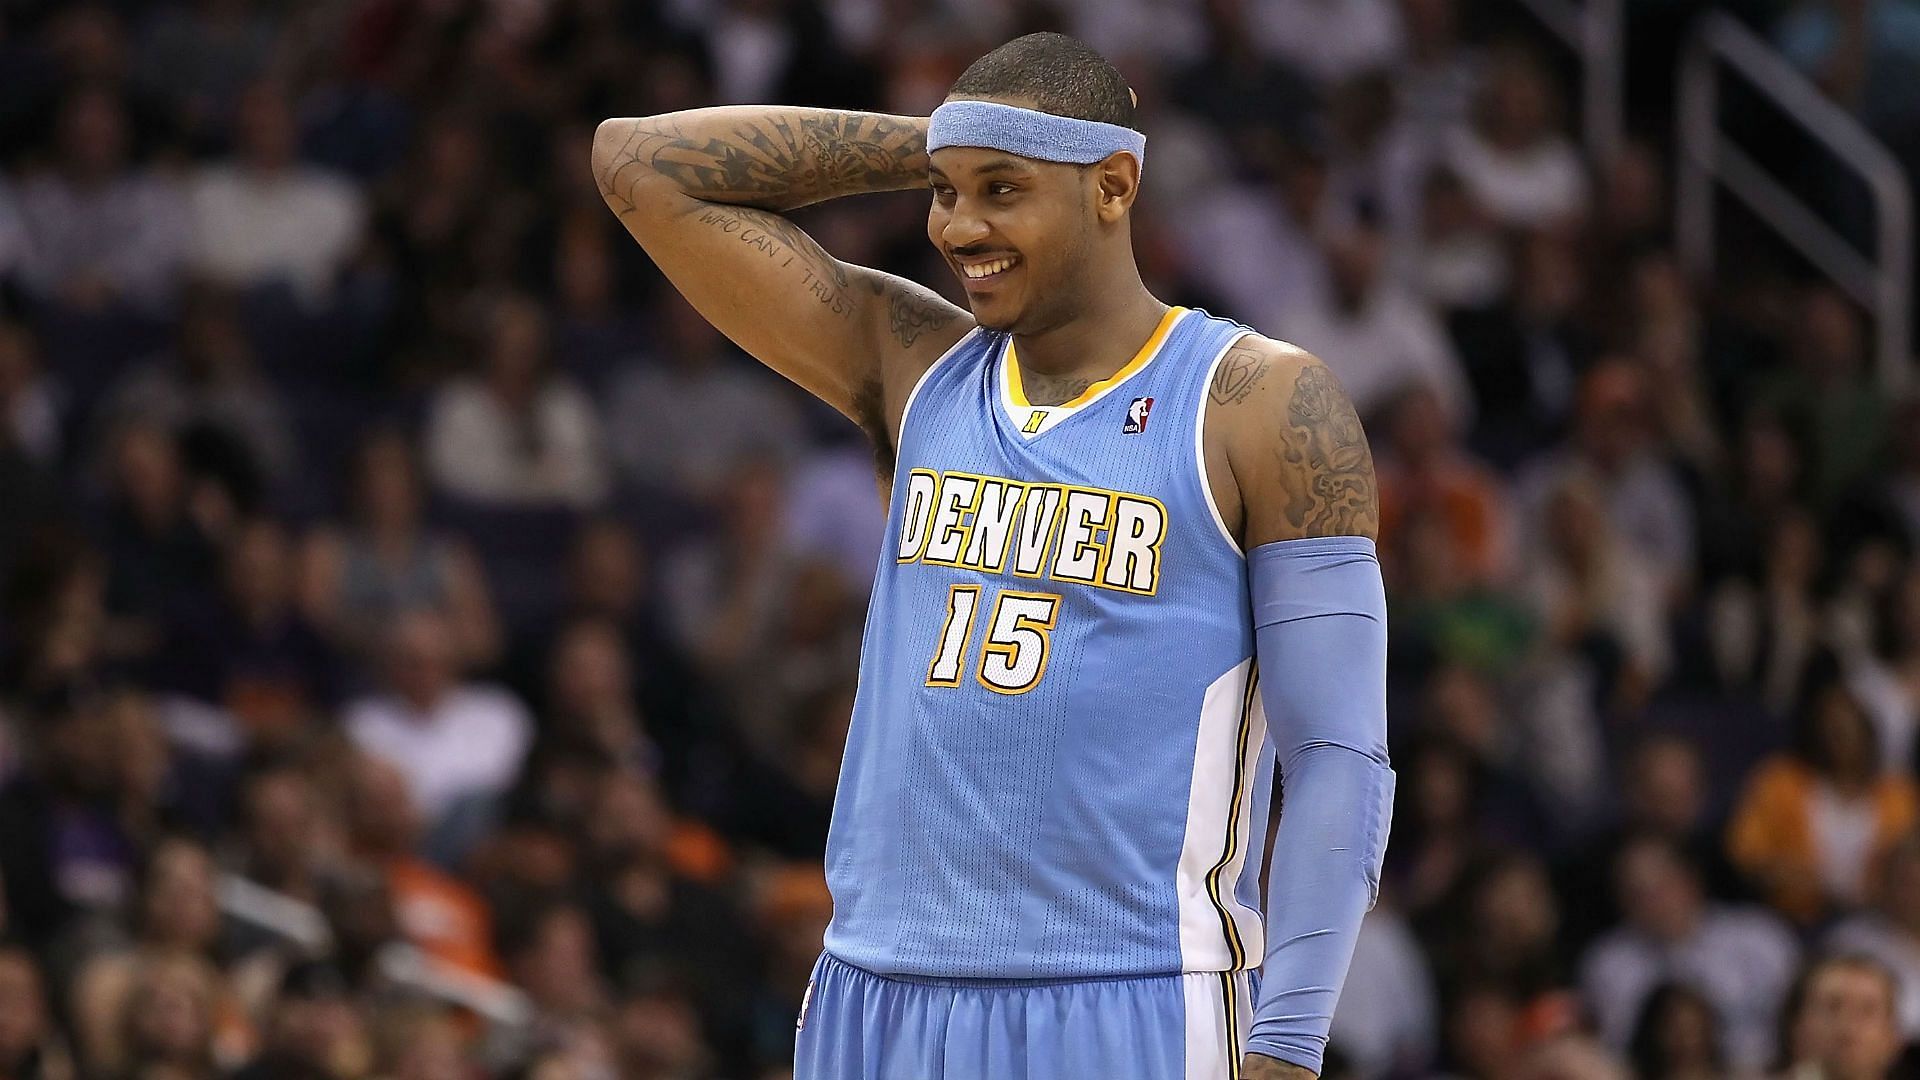 Carmelo Anthony dealt with some injuries during his time with the Denver Nuggets